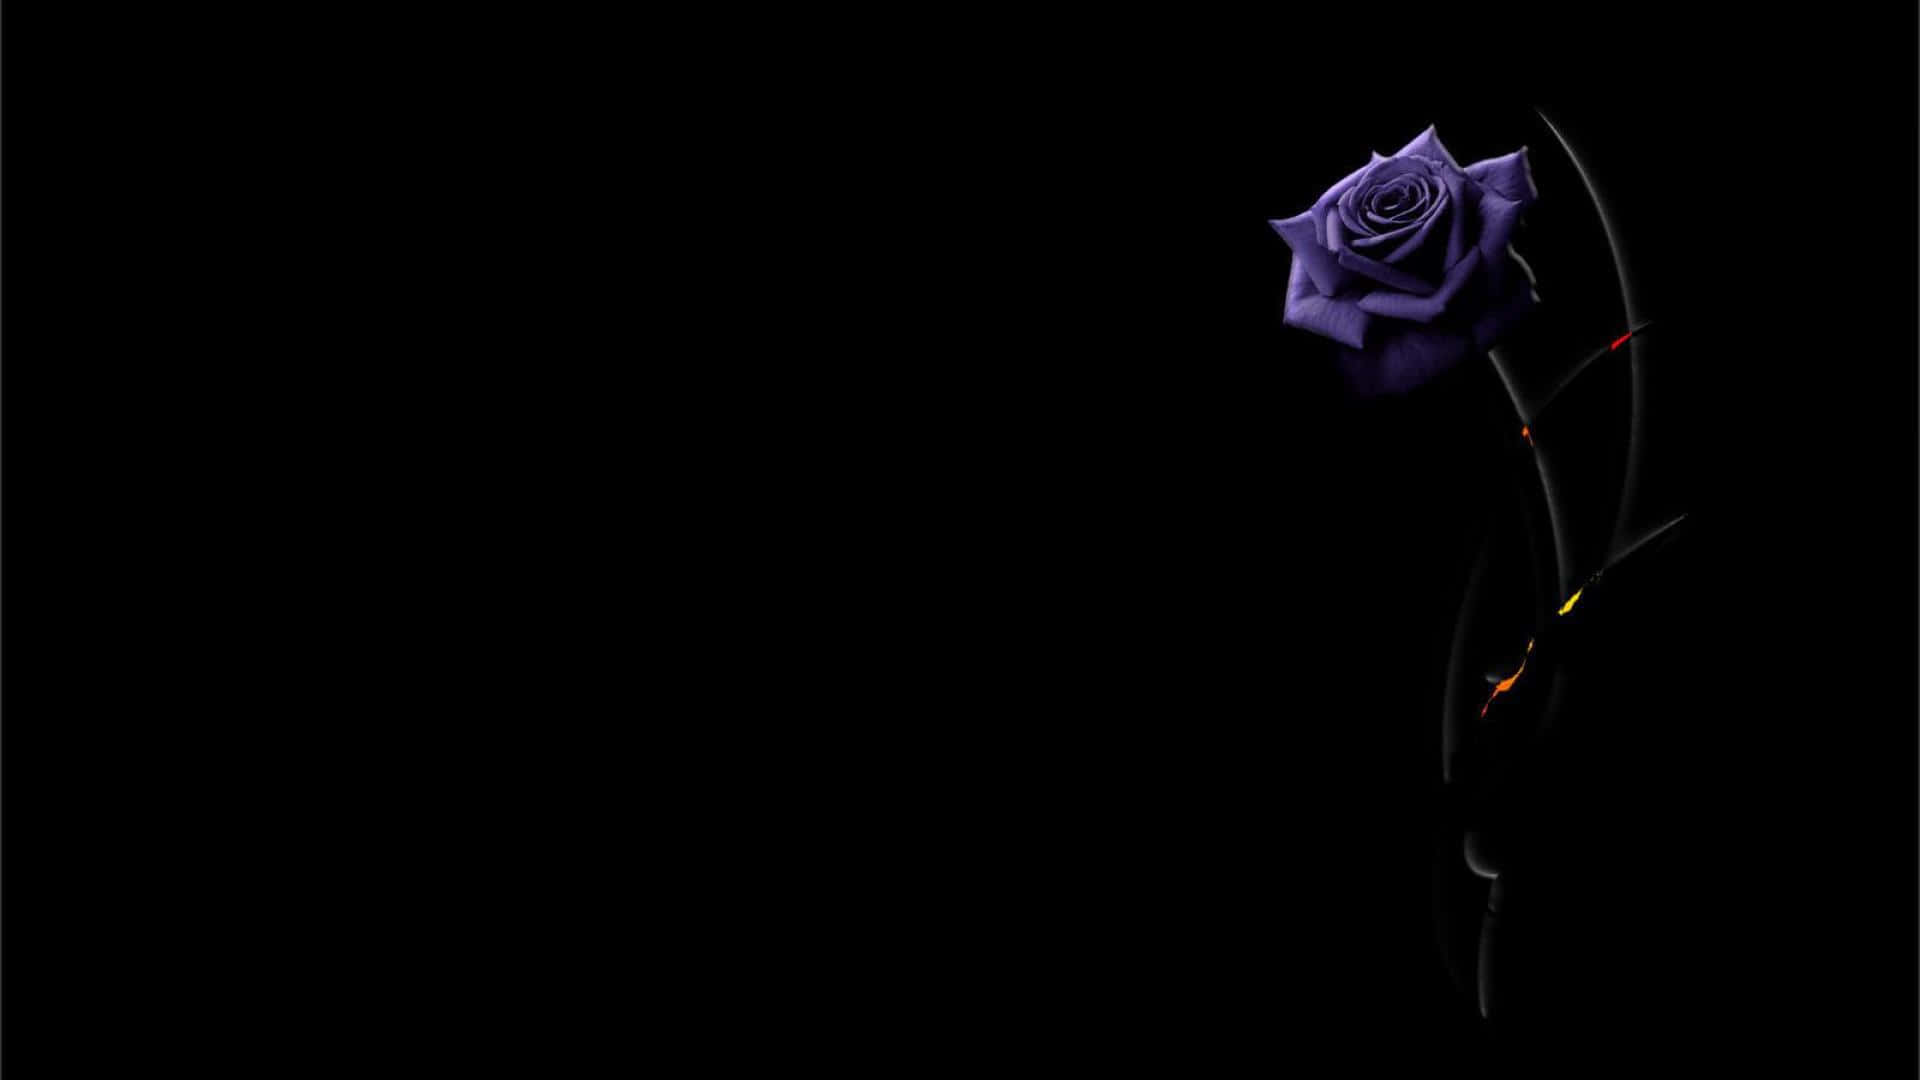 A Purple Rose Is Shown Against A Black Background Background